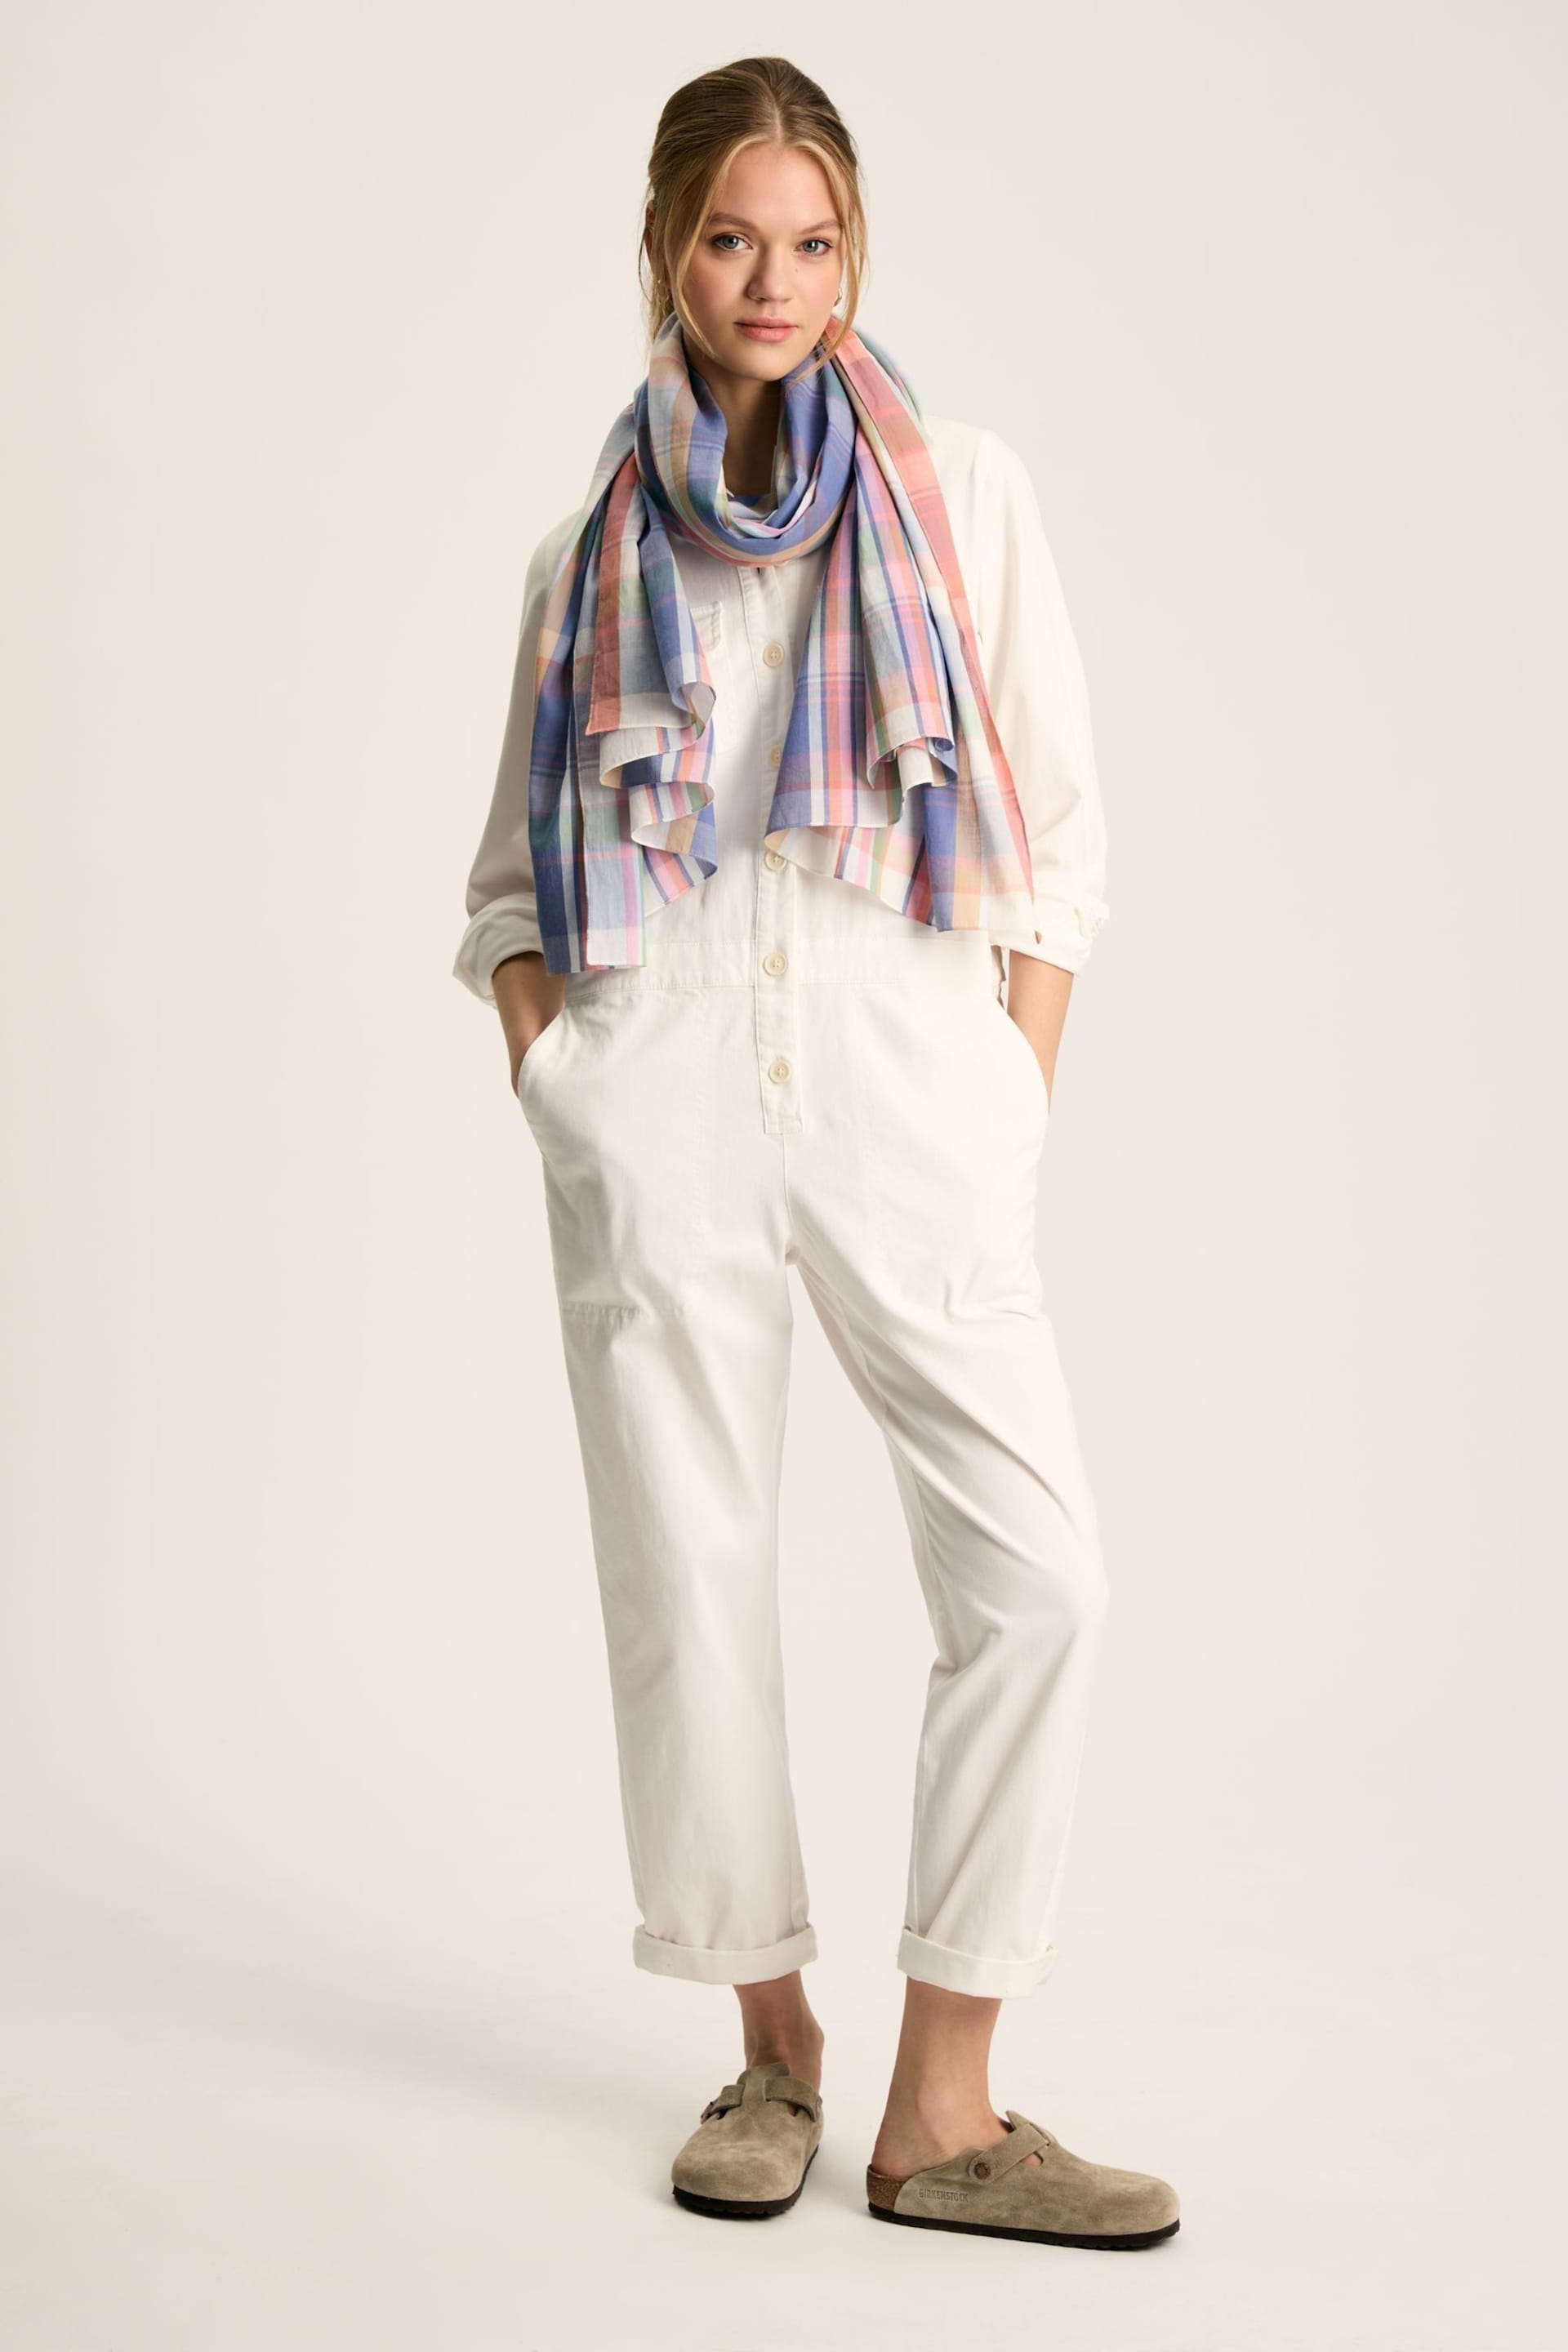 Joules Harlyn Blue Cotton Summer Scarf - Image 2 of 5